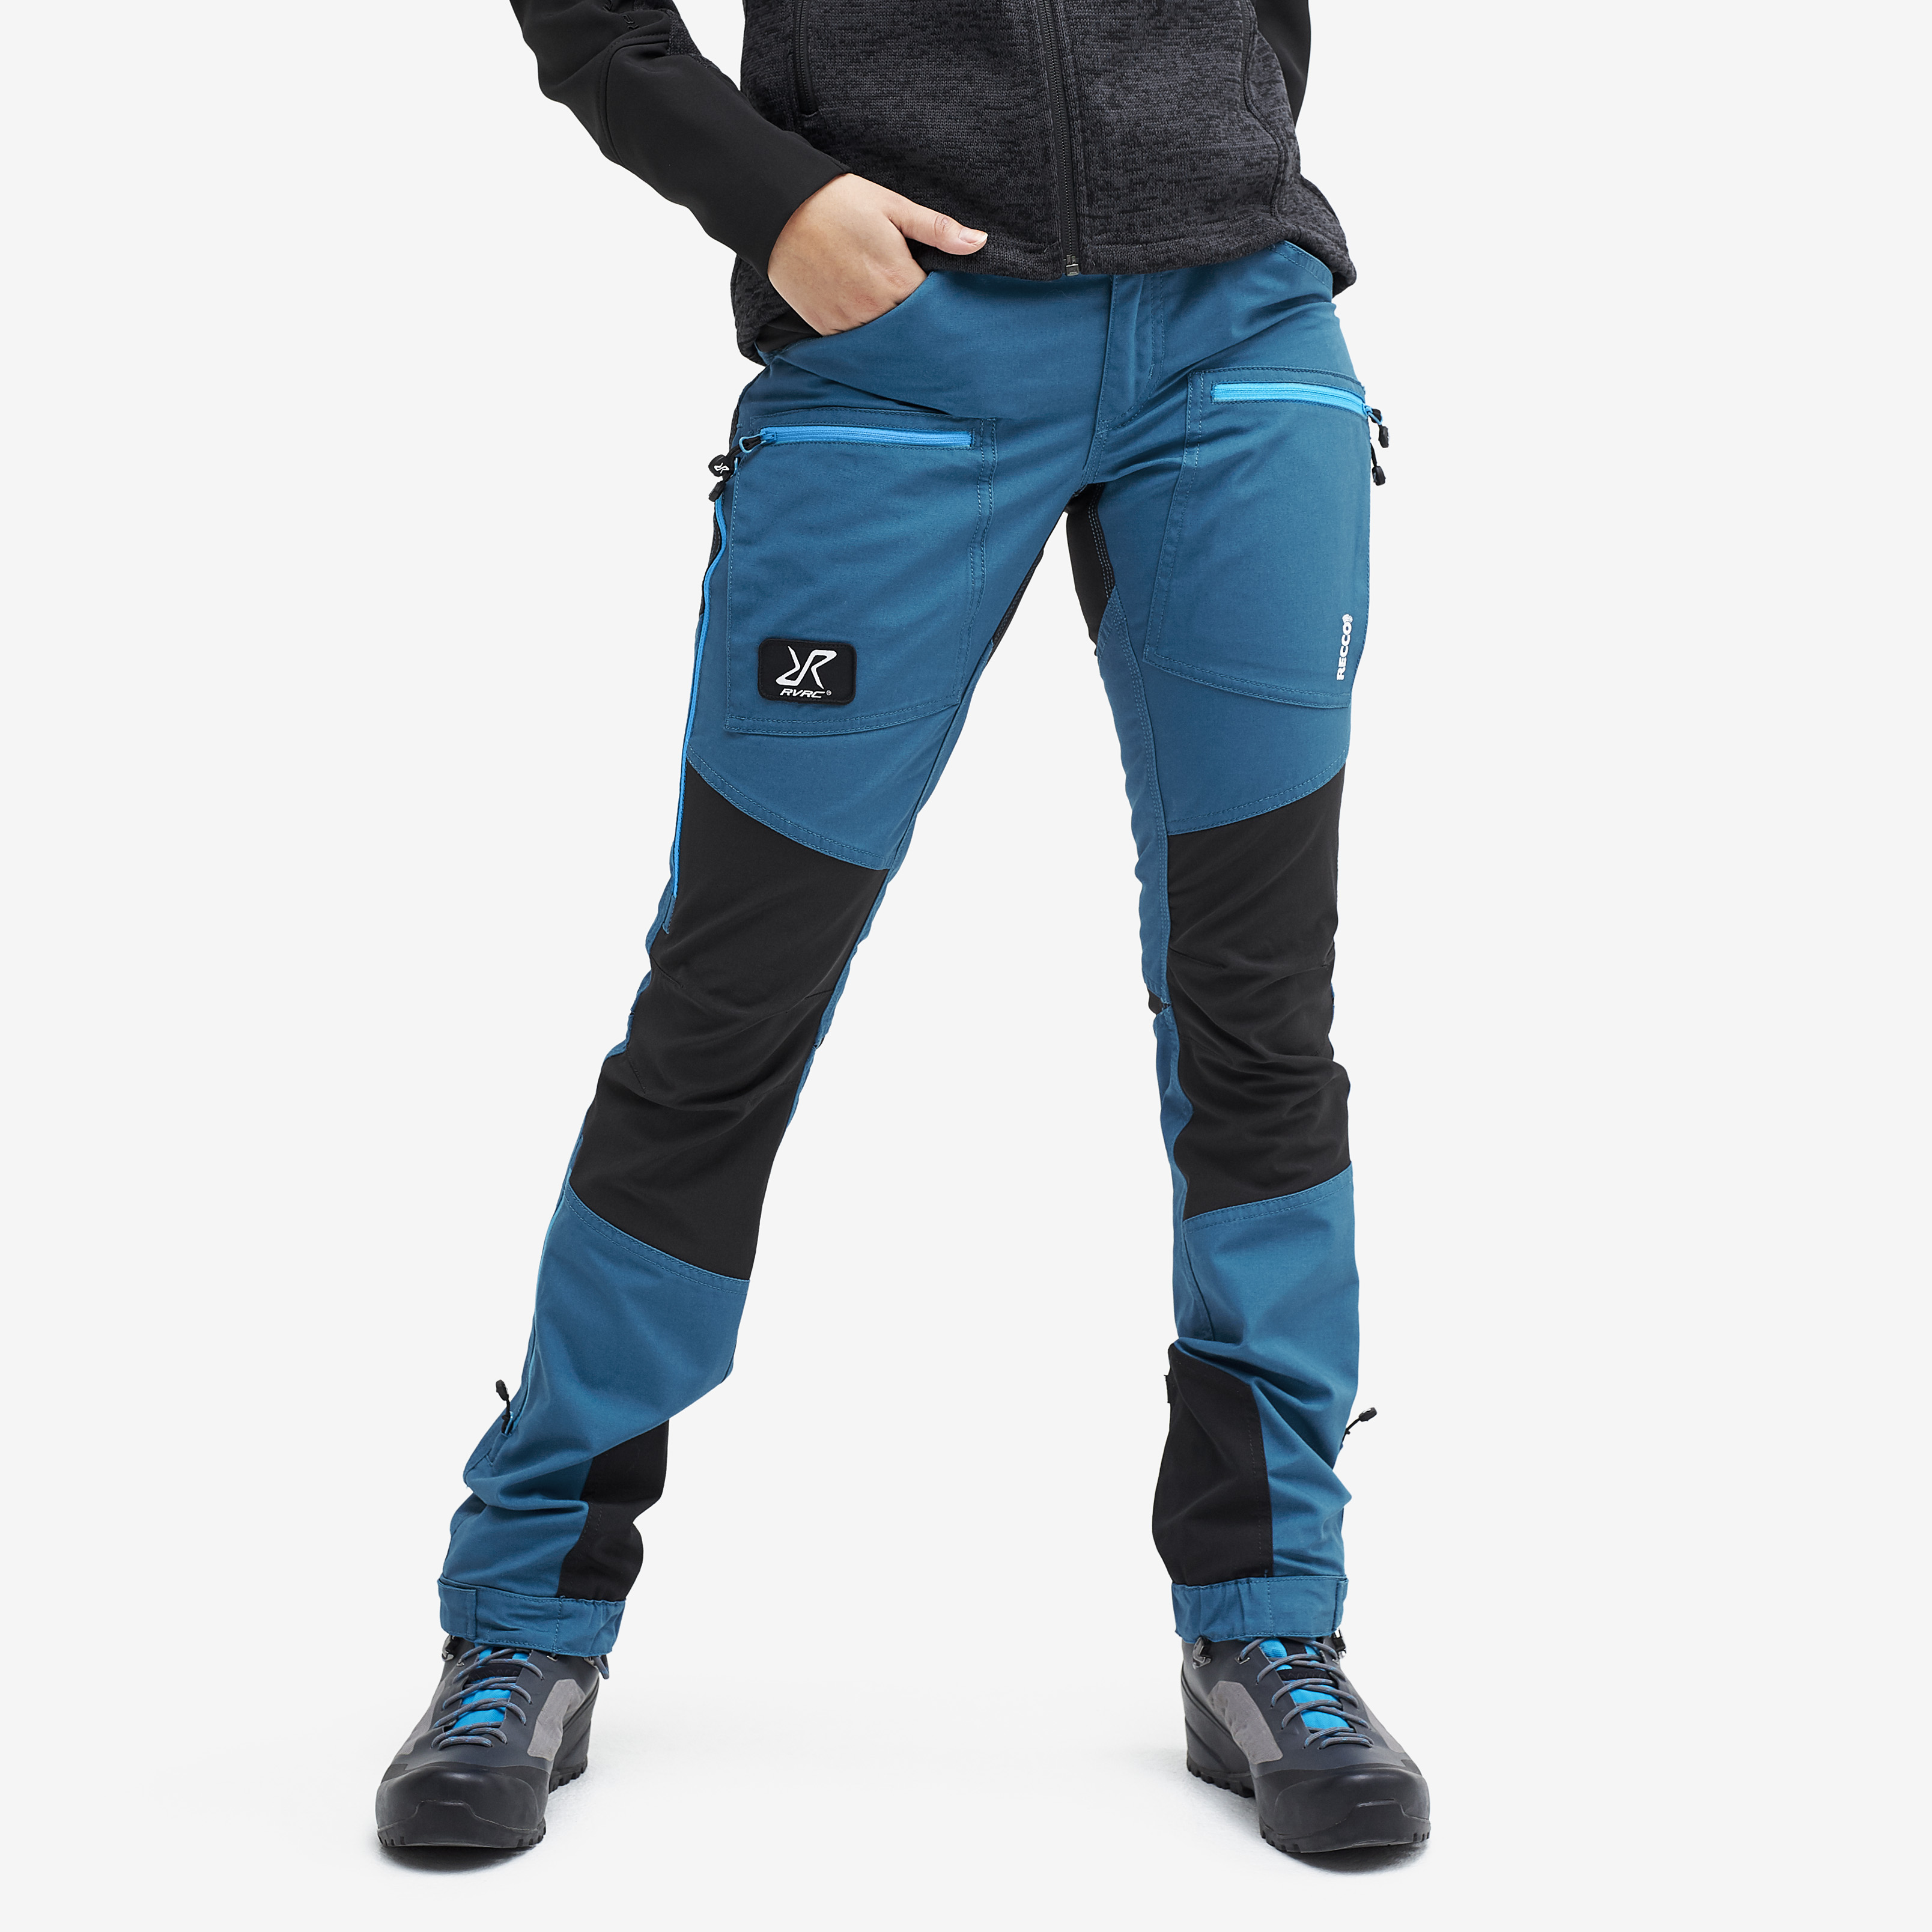 Nordwand Pro Rescue hiking trousers for women in blue